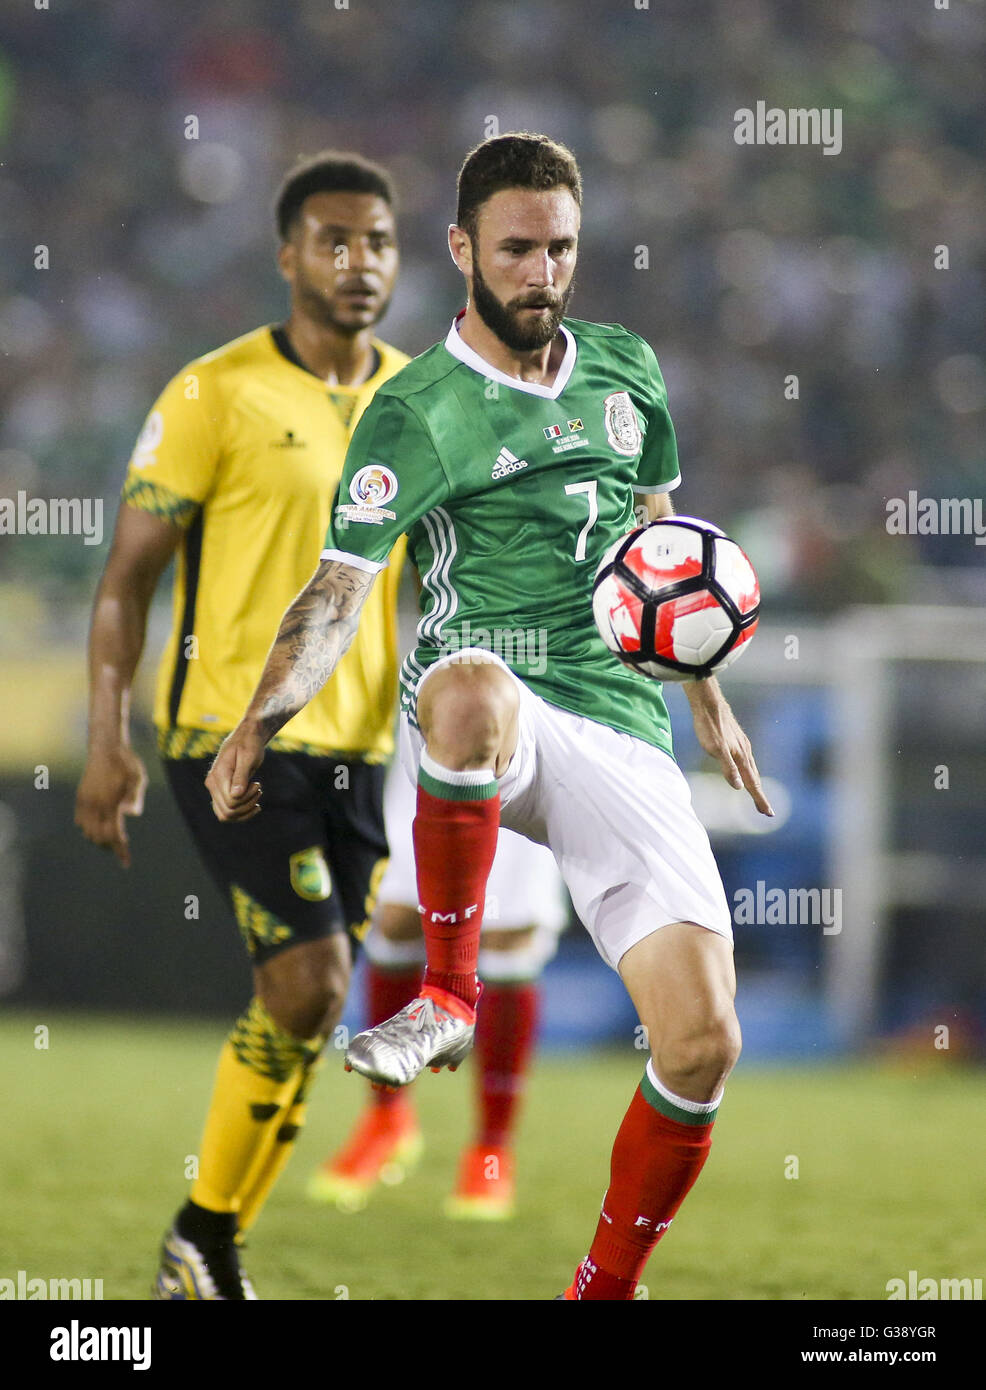 Los Angeles, California, USA. 9th June, 2016. Mexico defender Miguel Layun #7 in a Copa America soccer match between Mexico and ÃŠJamaica of Group C at the Rose Bowl in Pasadena, California, June 9, 2016. Mexico won 2-0. Credit:  Ringo Chiu/ZUMA Wire/Alamy Live News Stock Photo